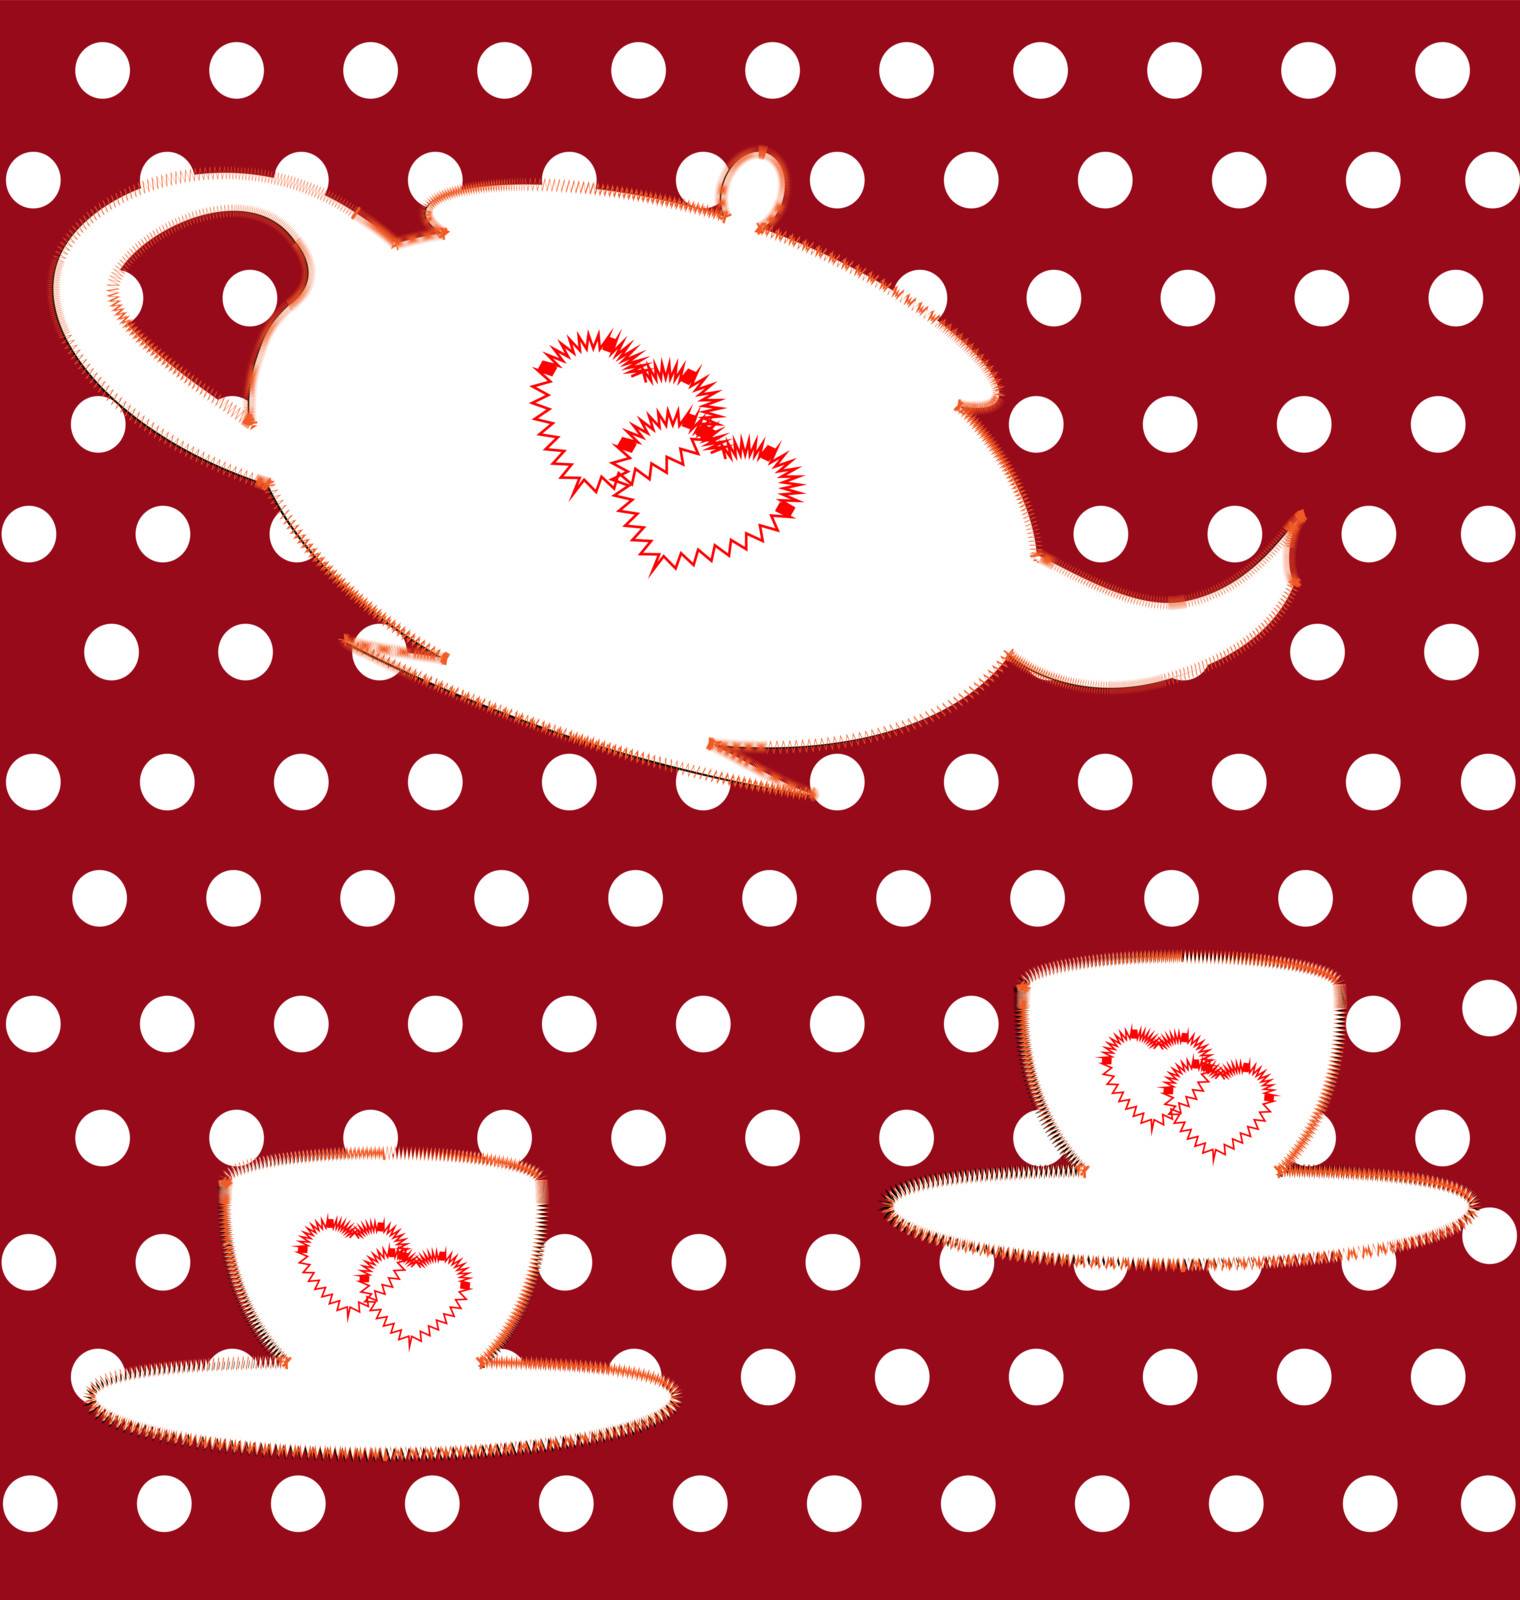 sewn on a red background white teapot and two cups